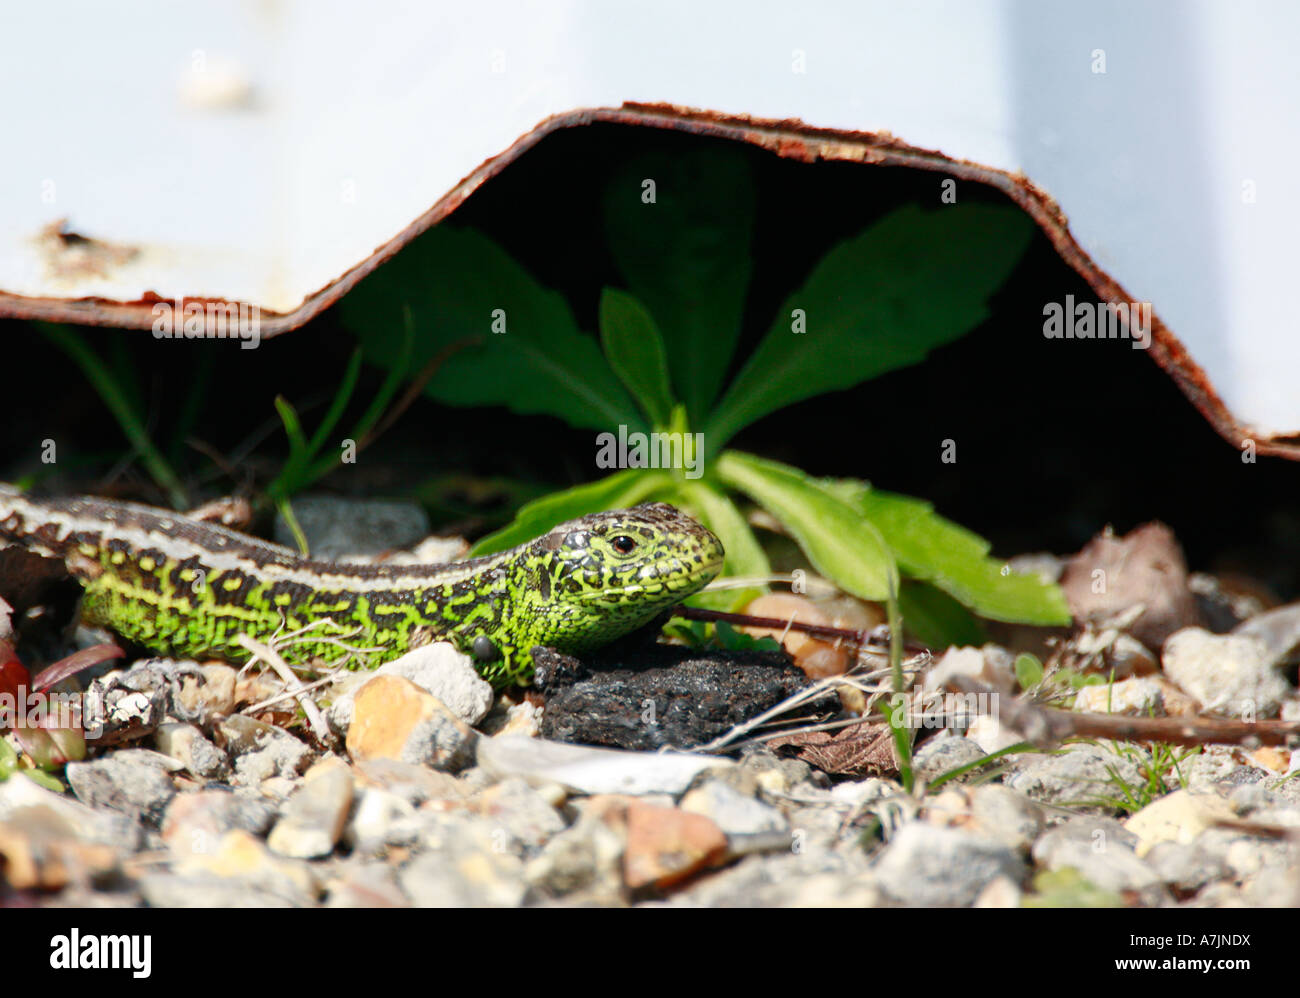 Male Sand Lizard Lacerta agilis in bright green breeding colours next to roof sheeting shelter Stock Photo